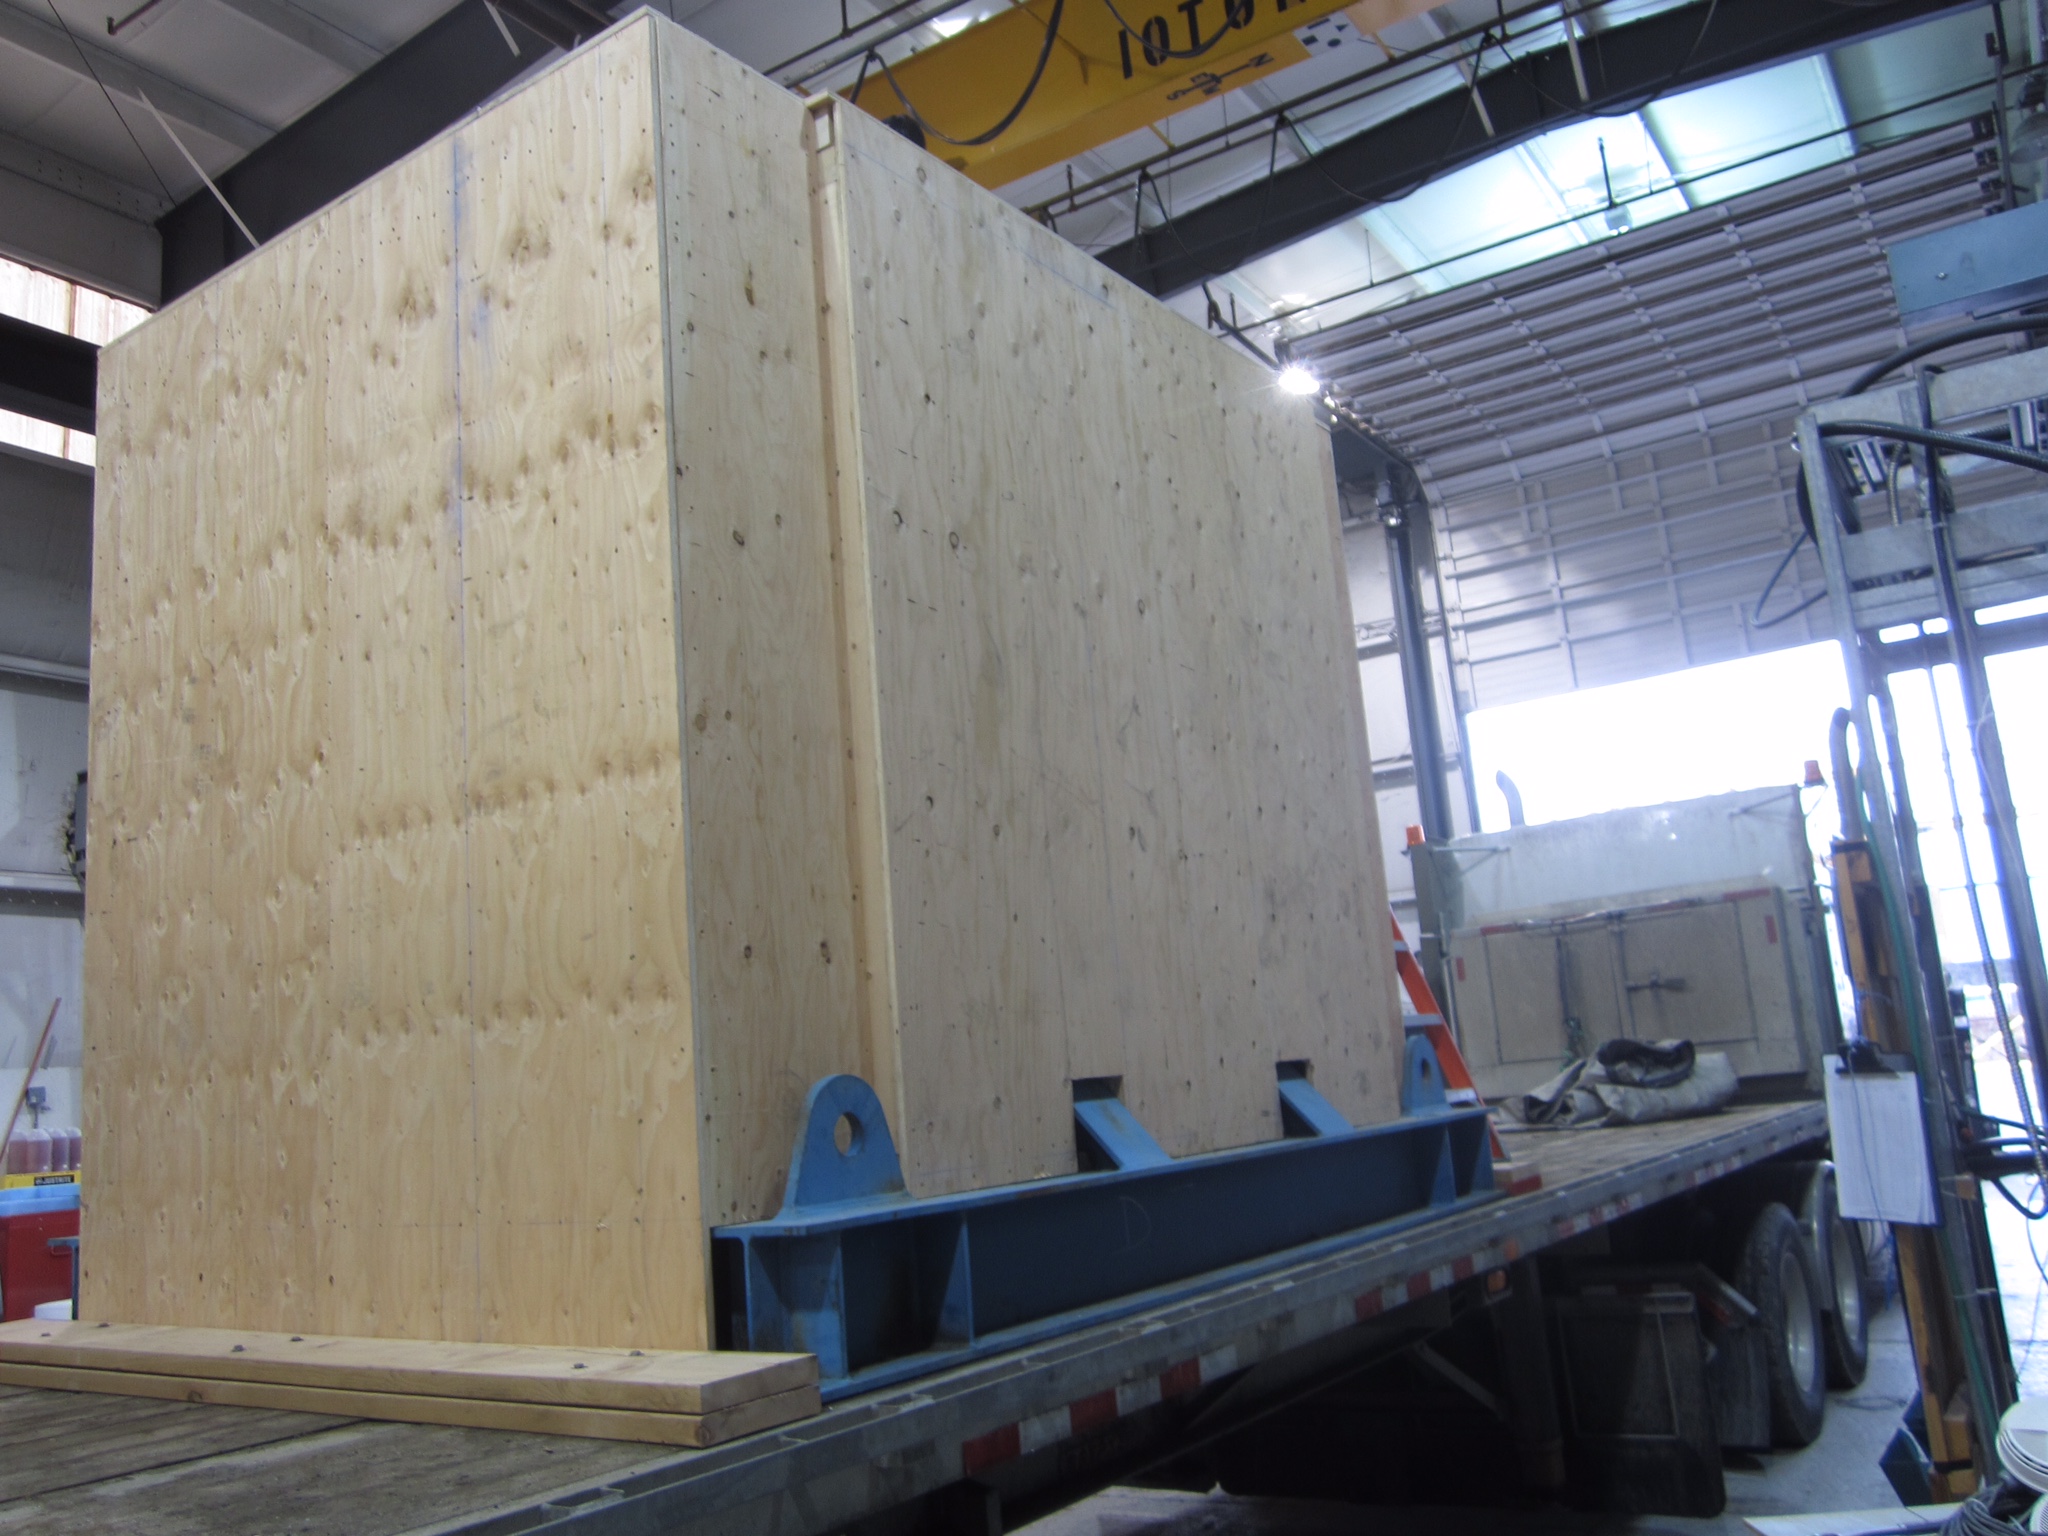 Cyclotron crated